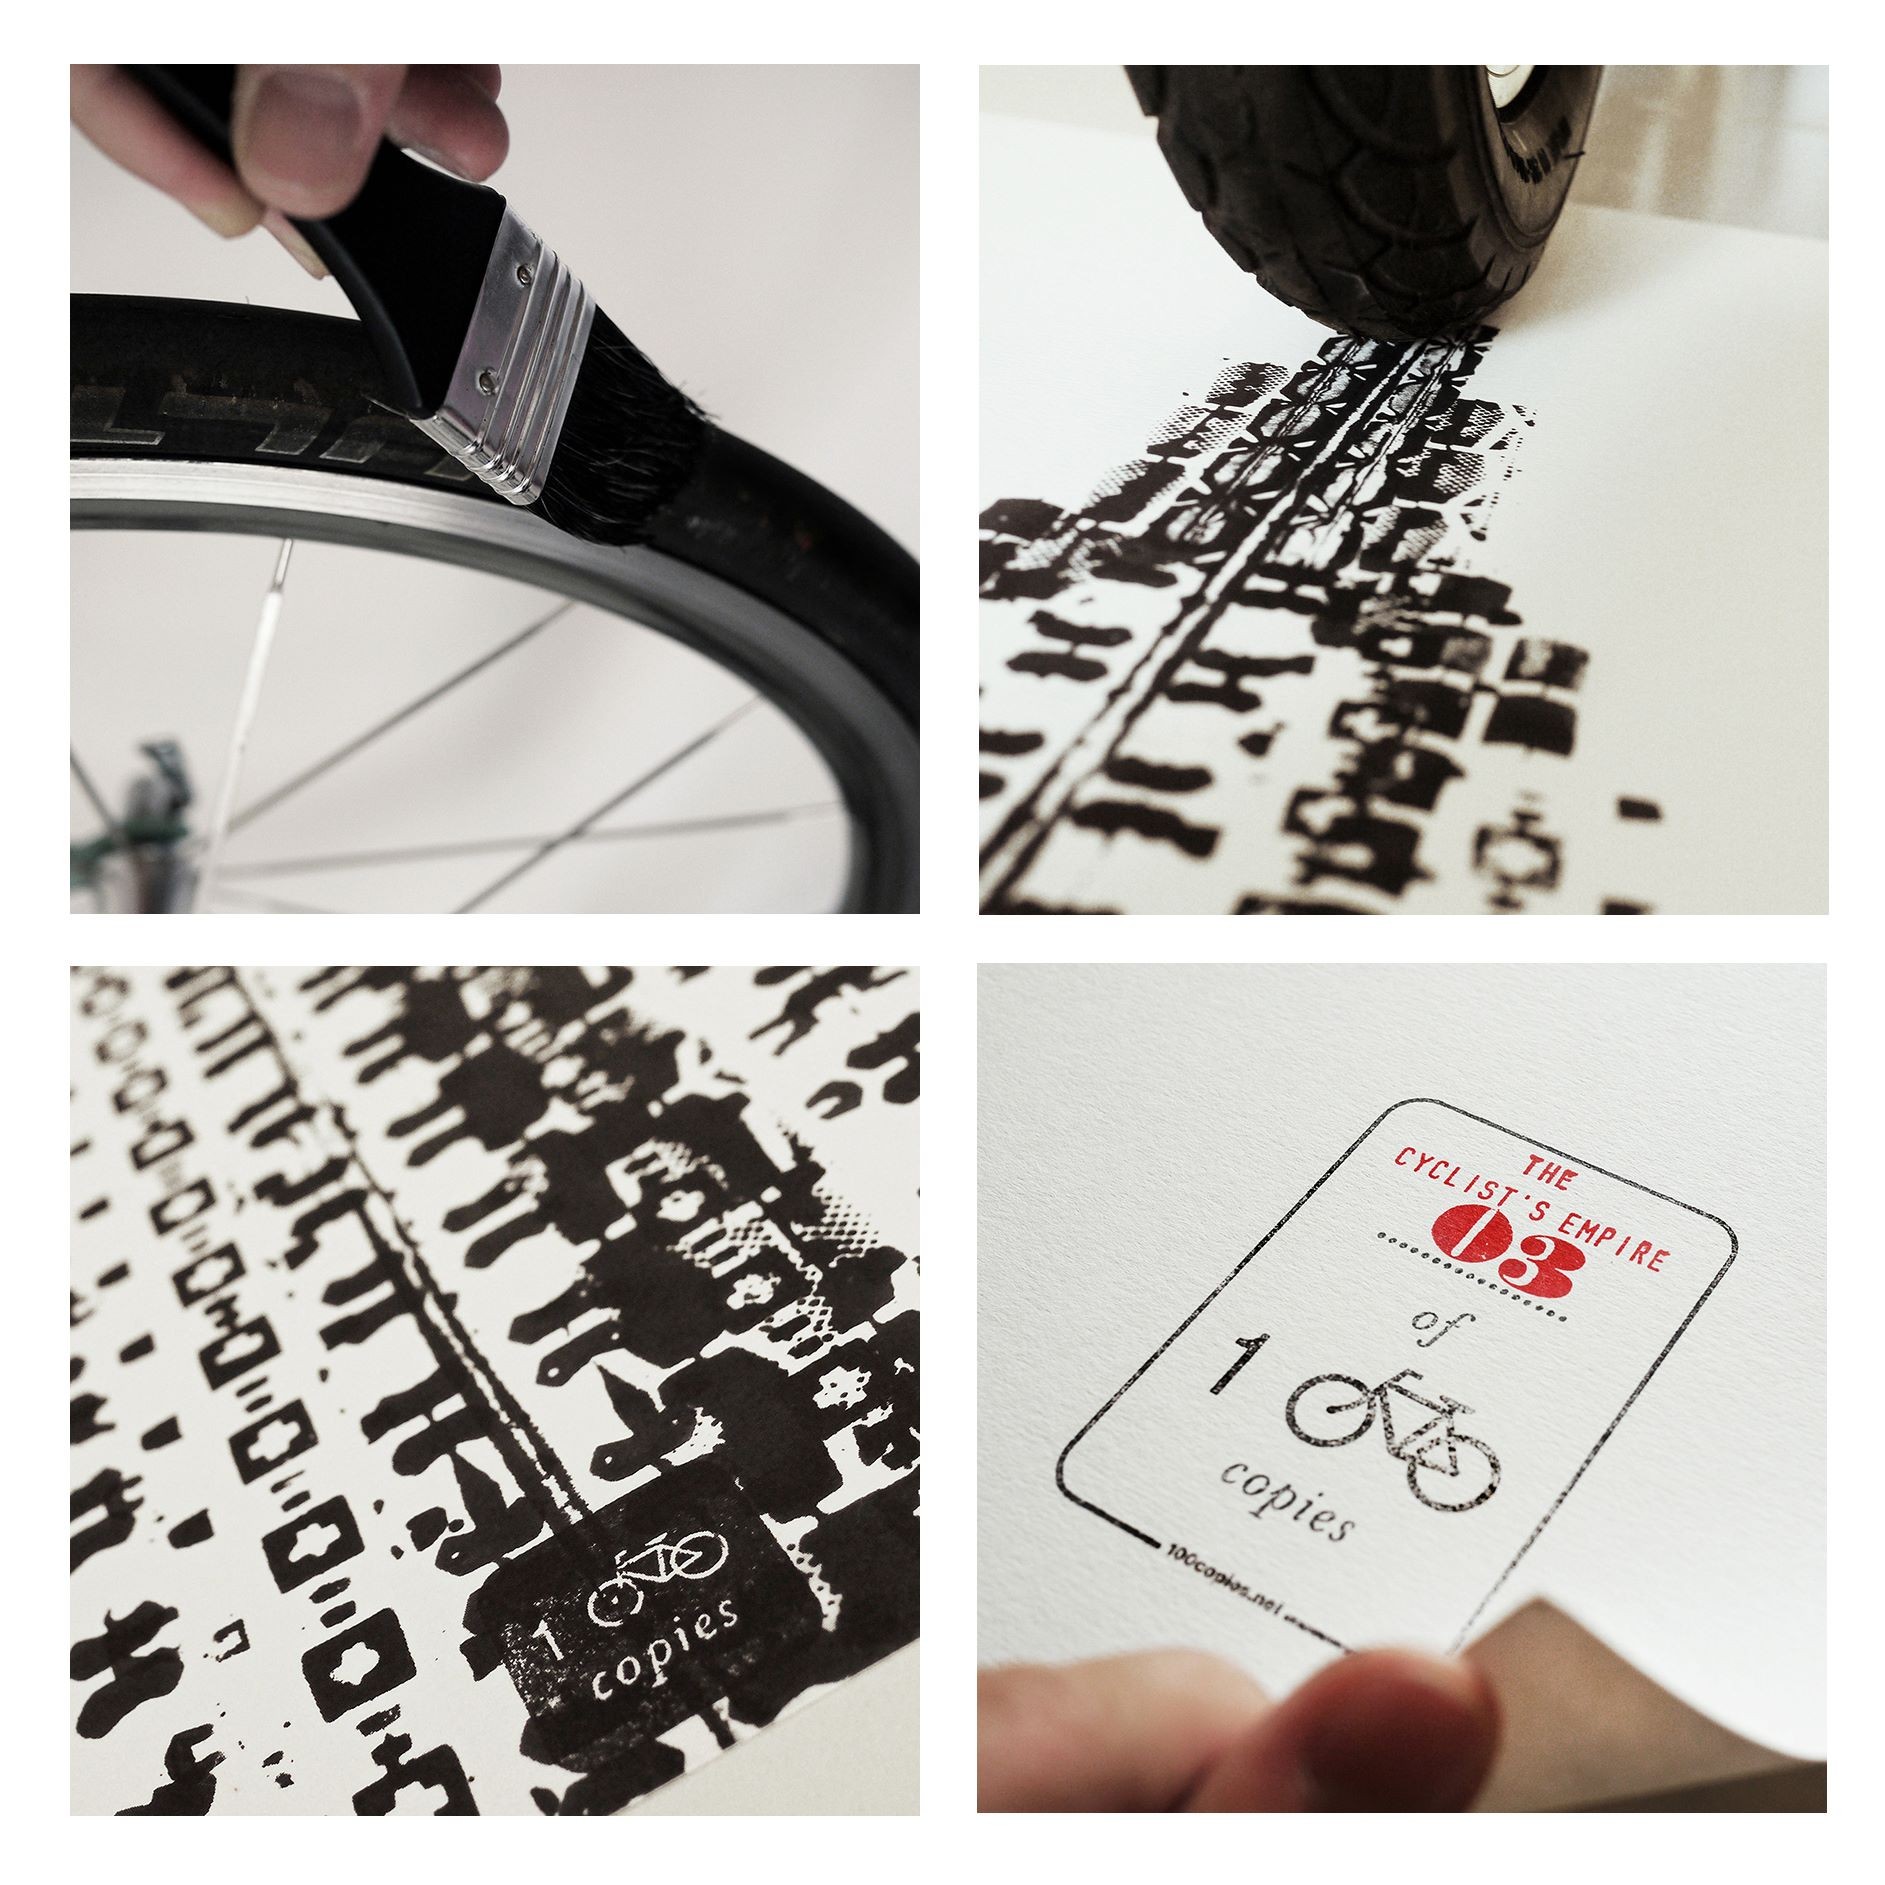 The Cyclist's Empire | ©100copies